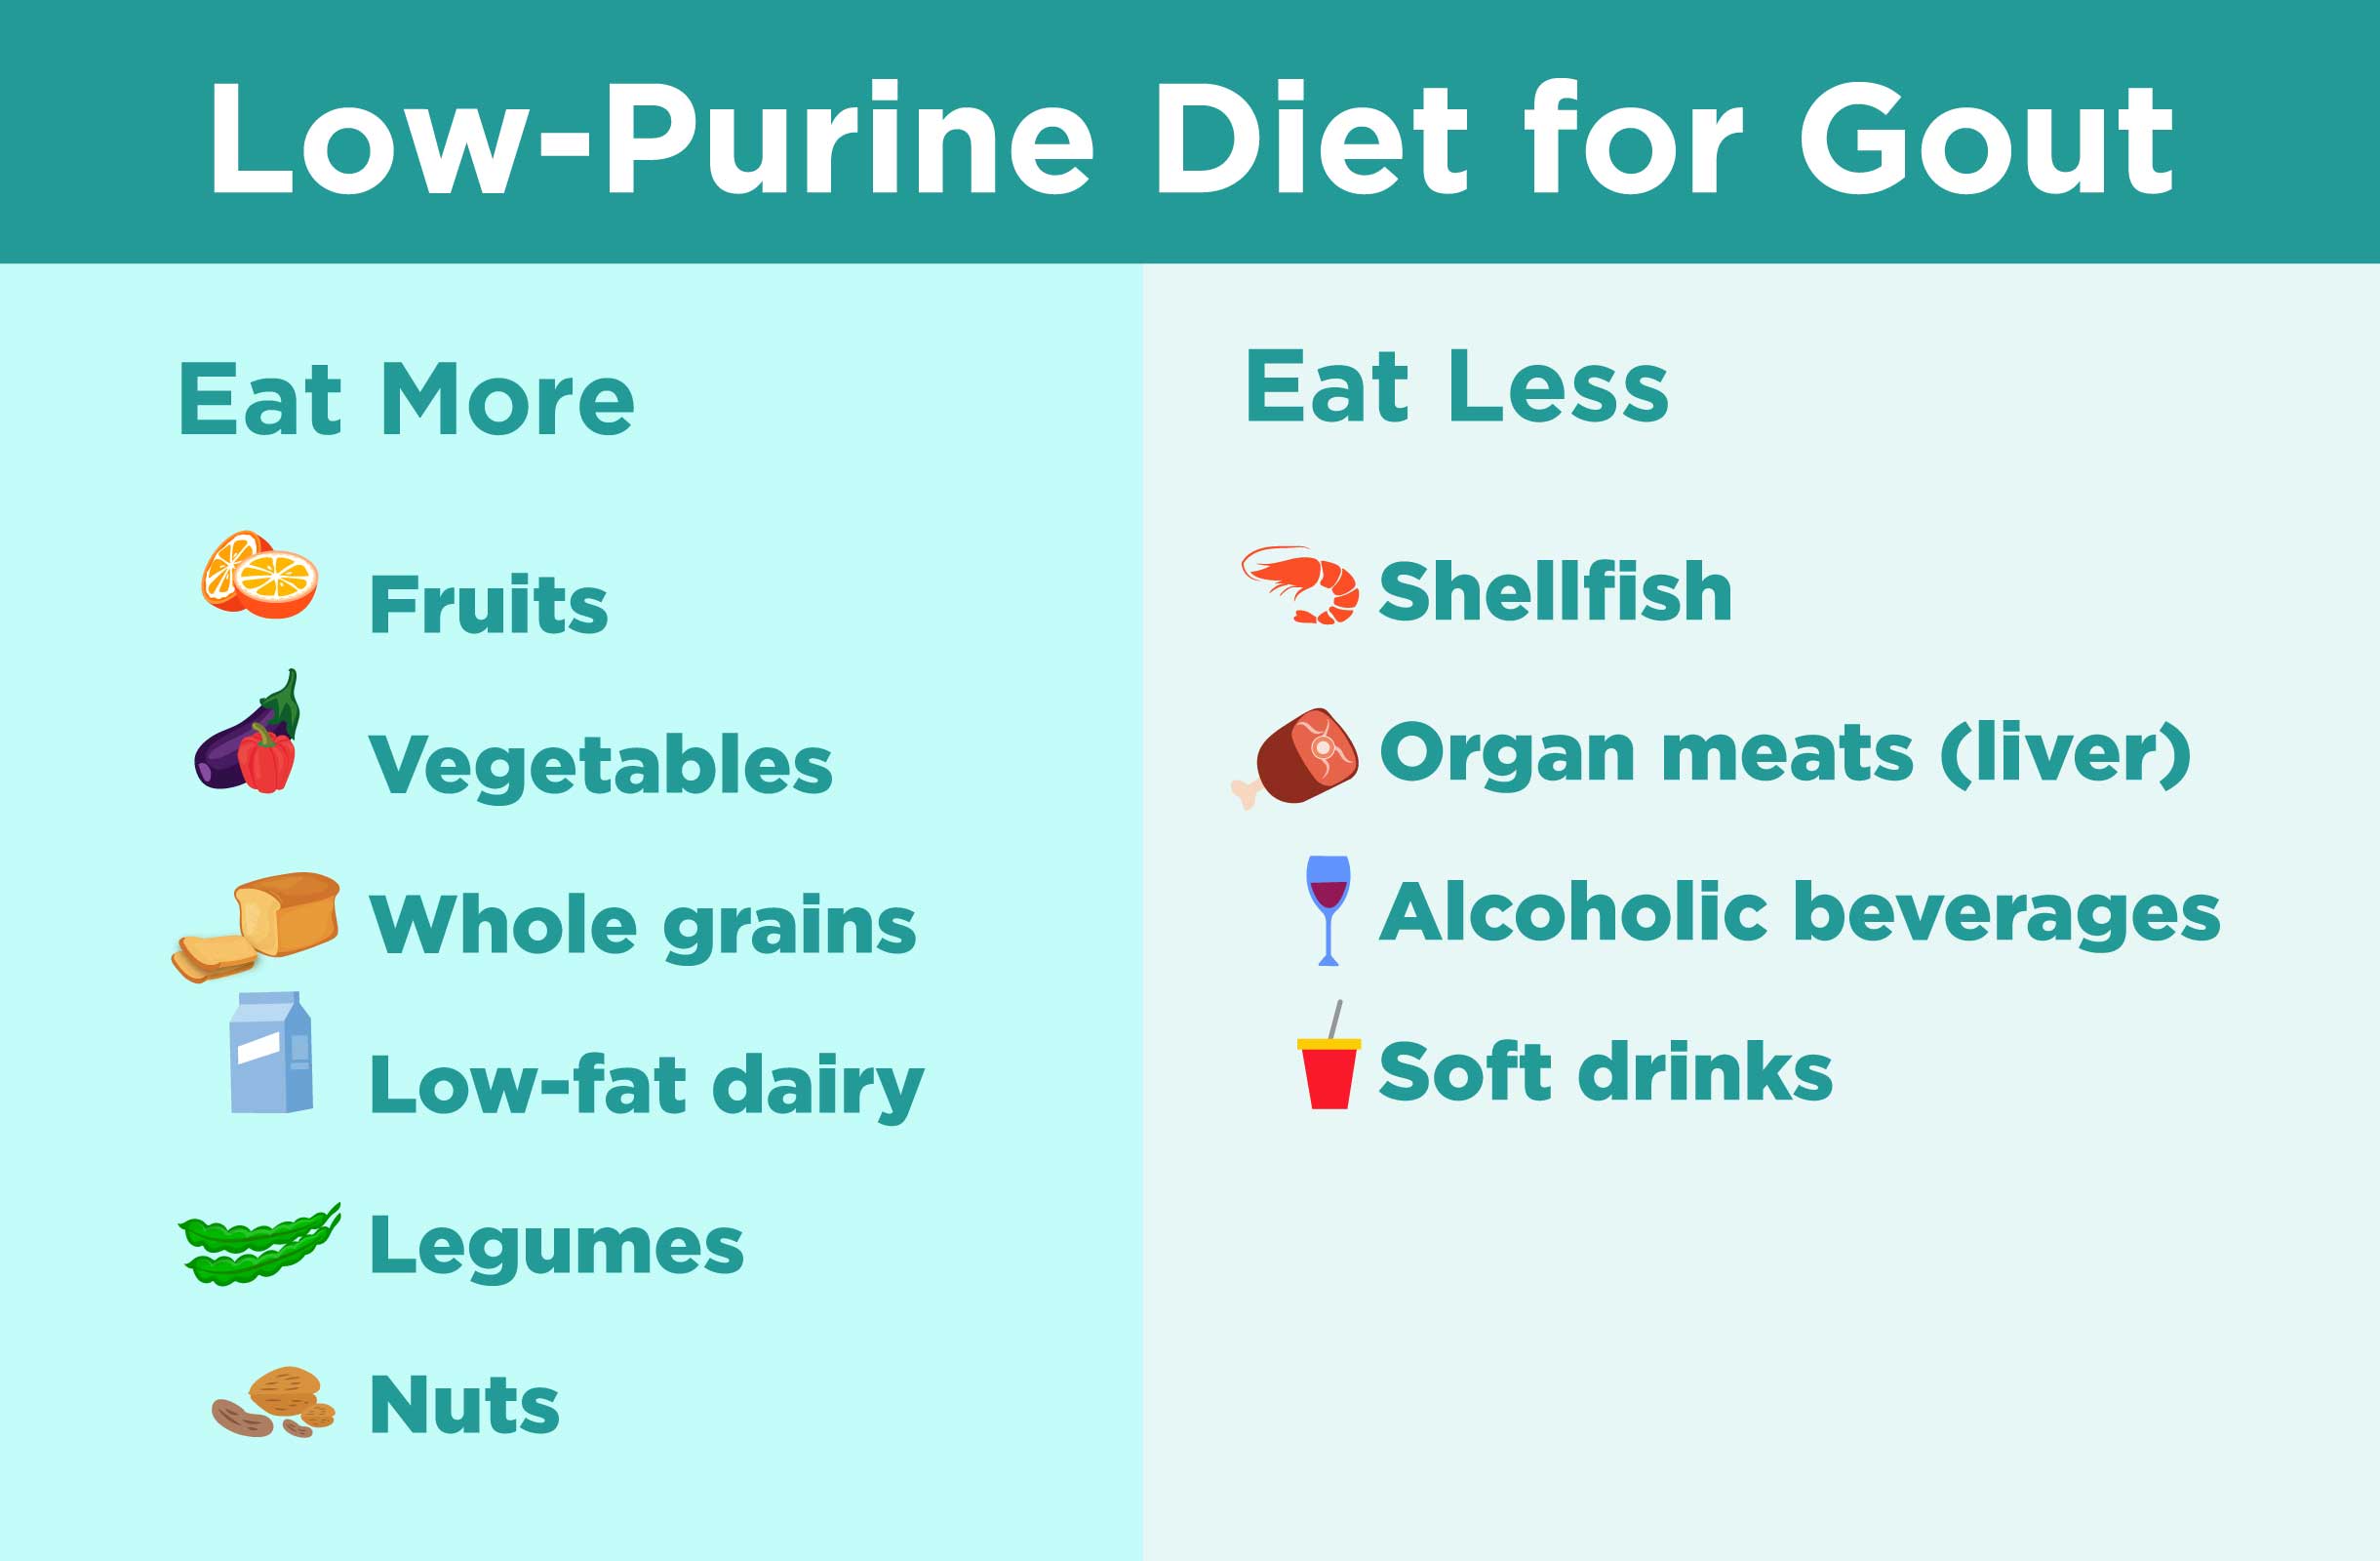 Low-Purine Diet For Gout: What To Eat, Sample Menu, And More